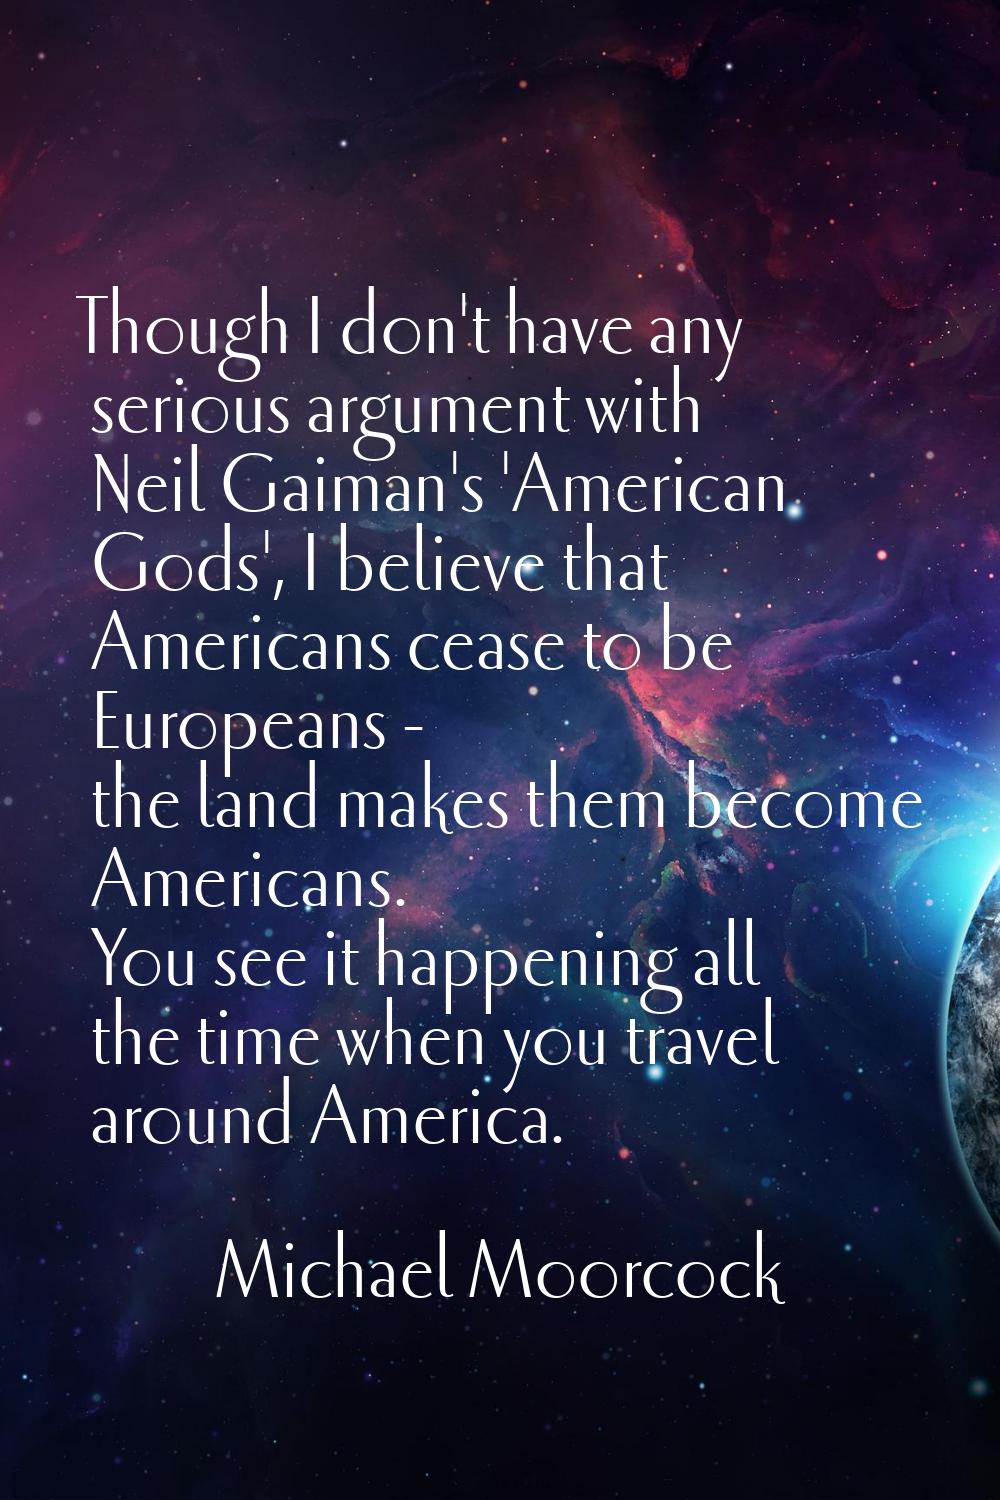 Though I don't have any serious argument with Neil Gaiman's 'American Gods', I believe that America